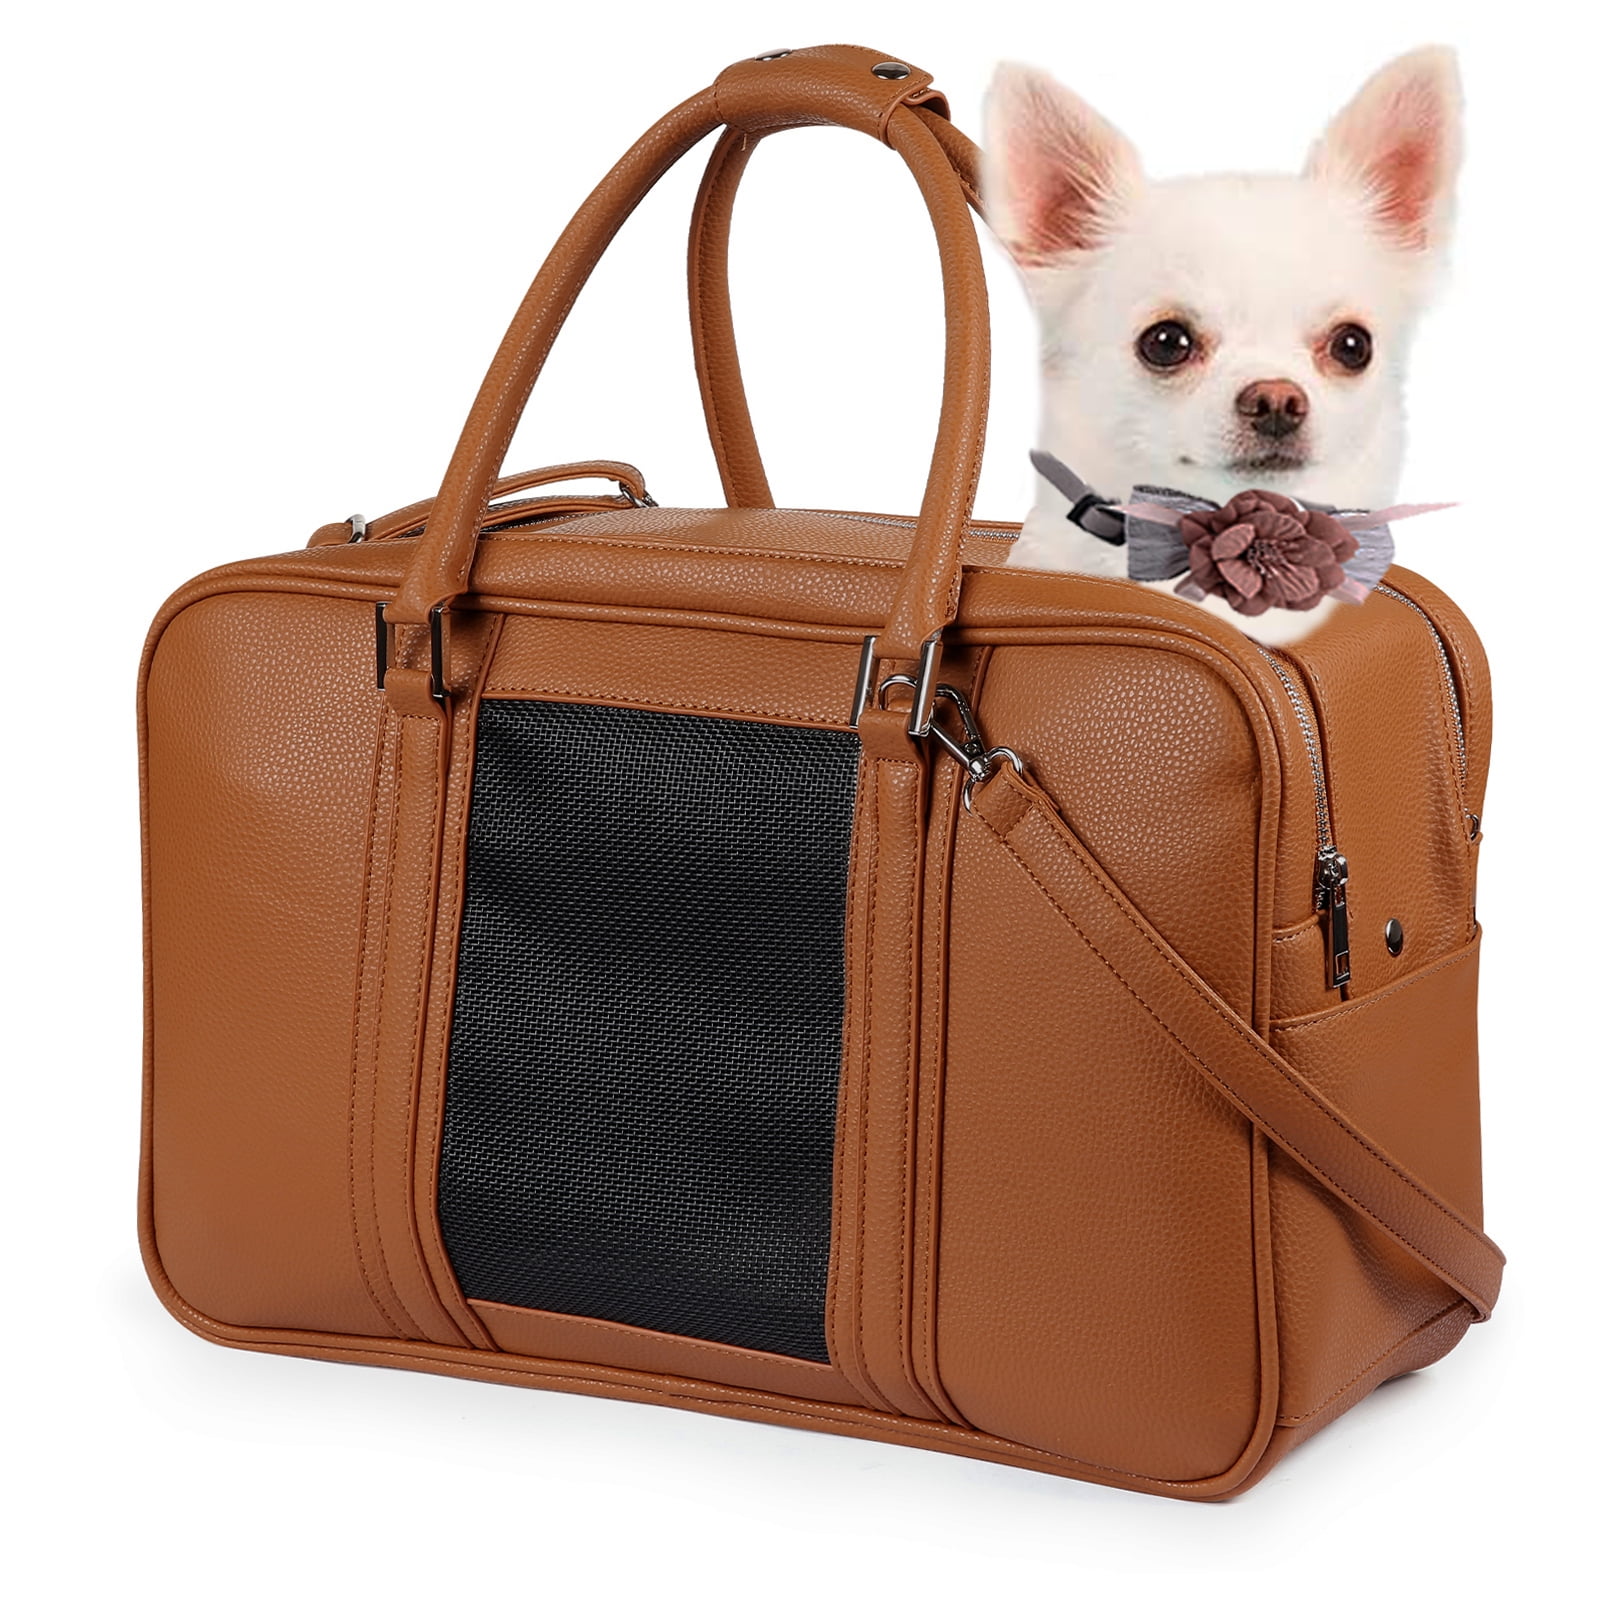 xuyidan Fashion Pet Carrier Dog Purse Foldable Dog Cat Handbag Leather Tote  Bag Soft-Sided Carriering for Puppy and Small Dogs Portable Travel  Airline-Approved, (White, S) 